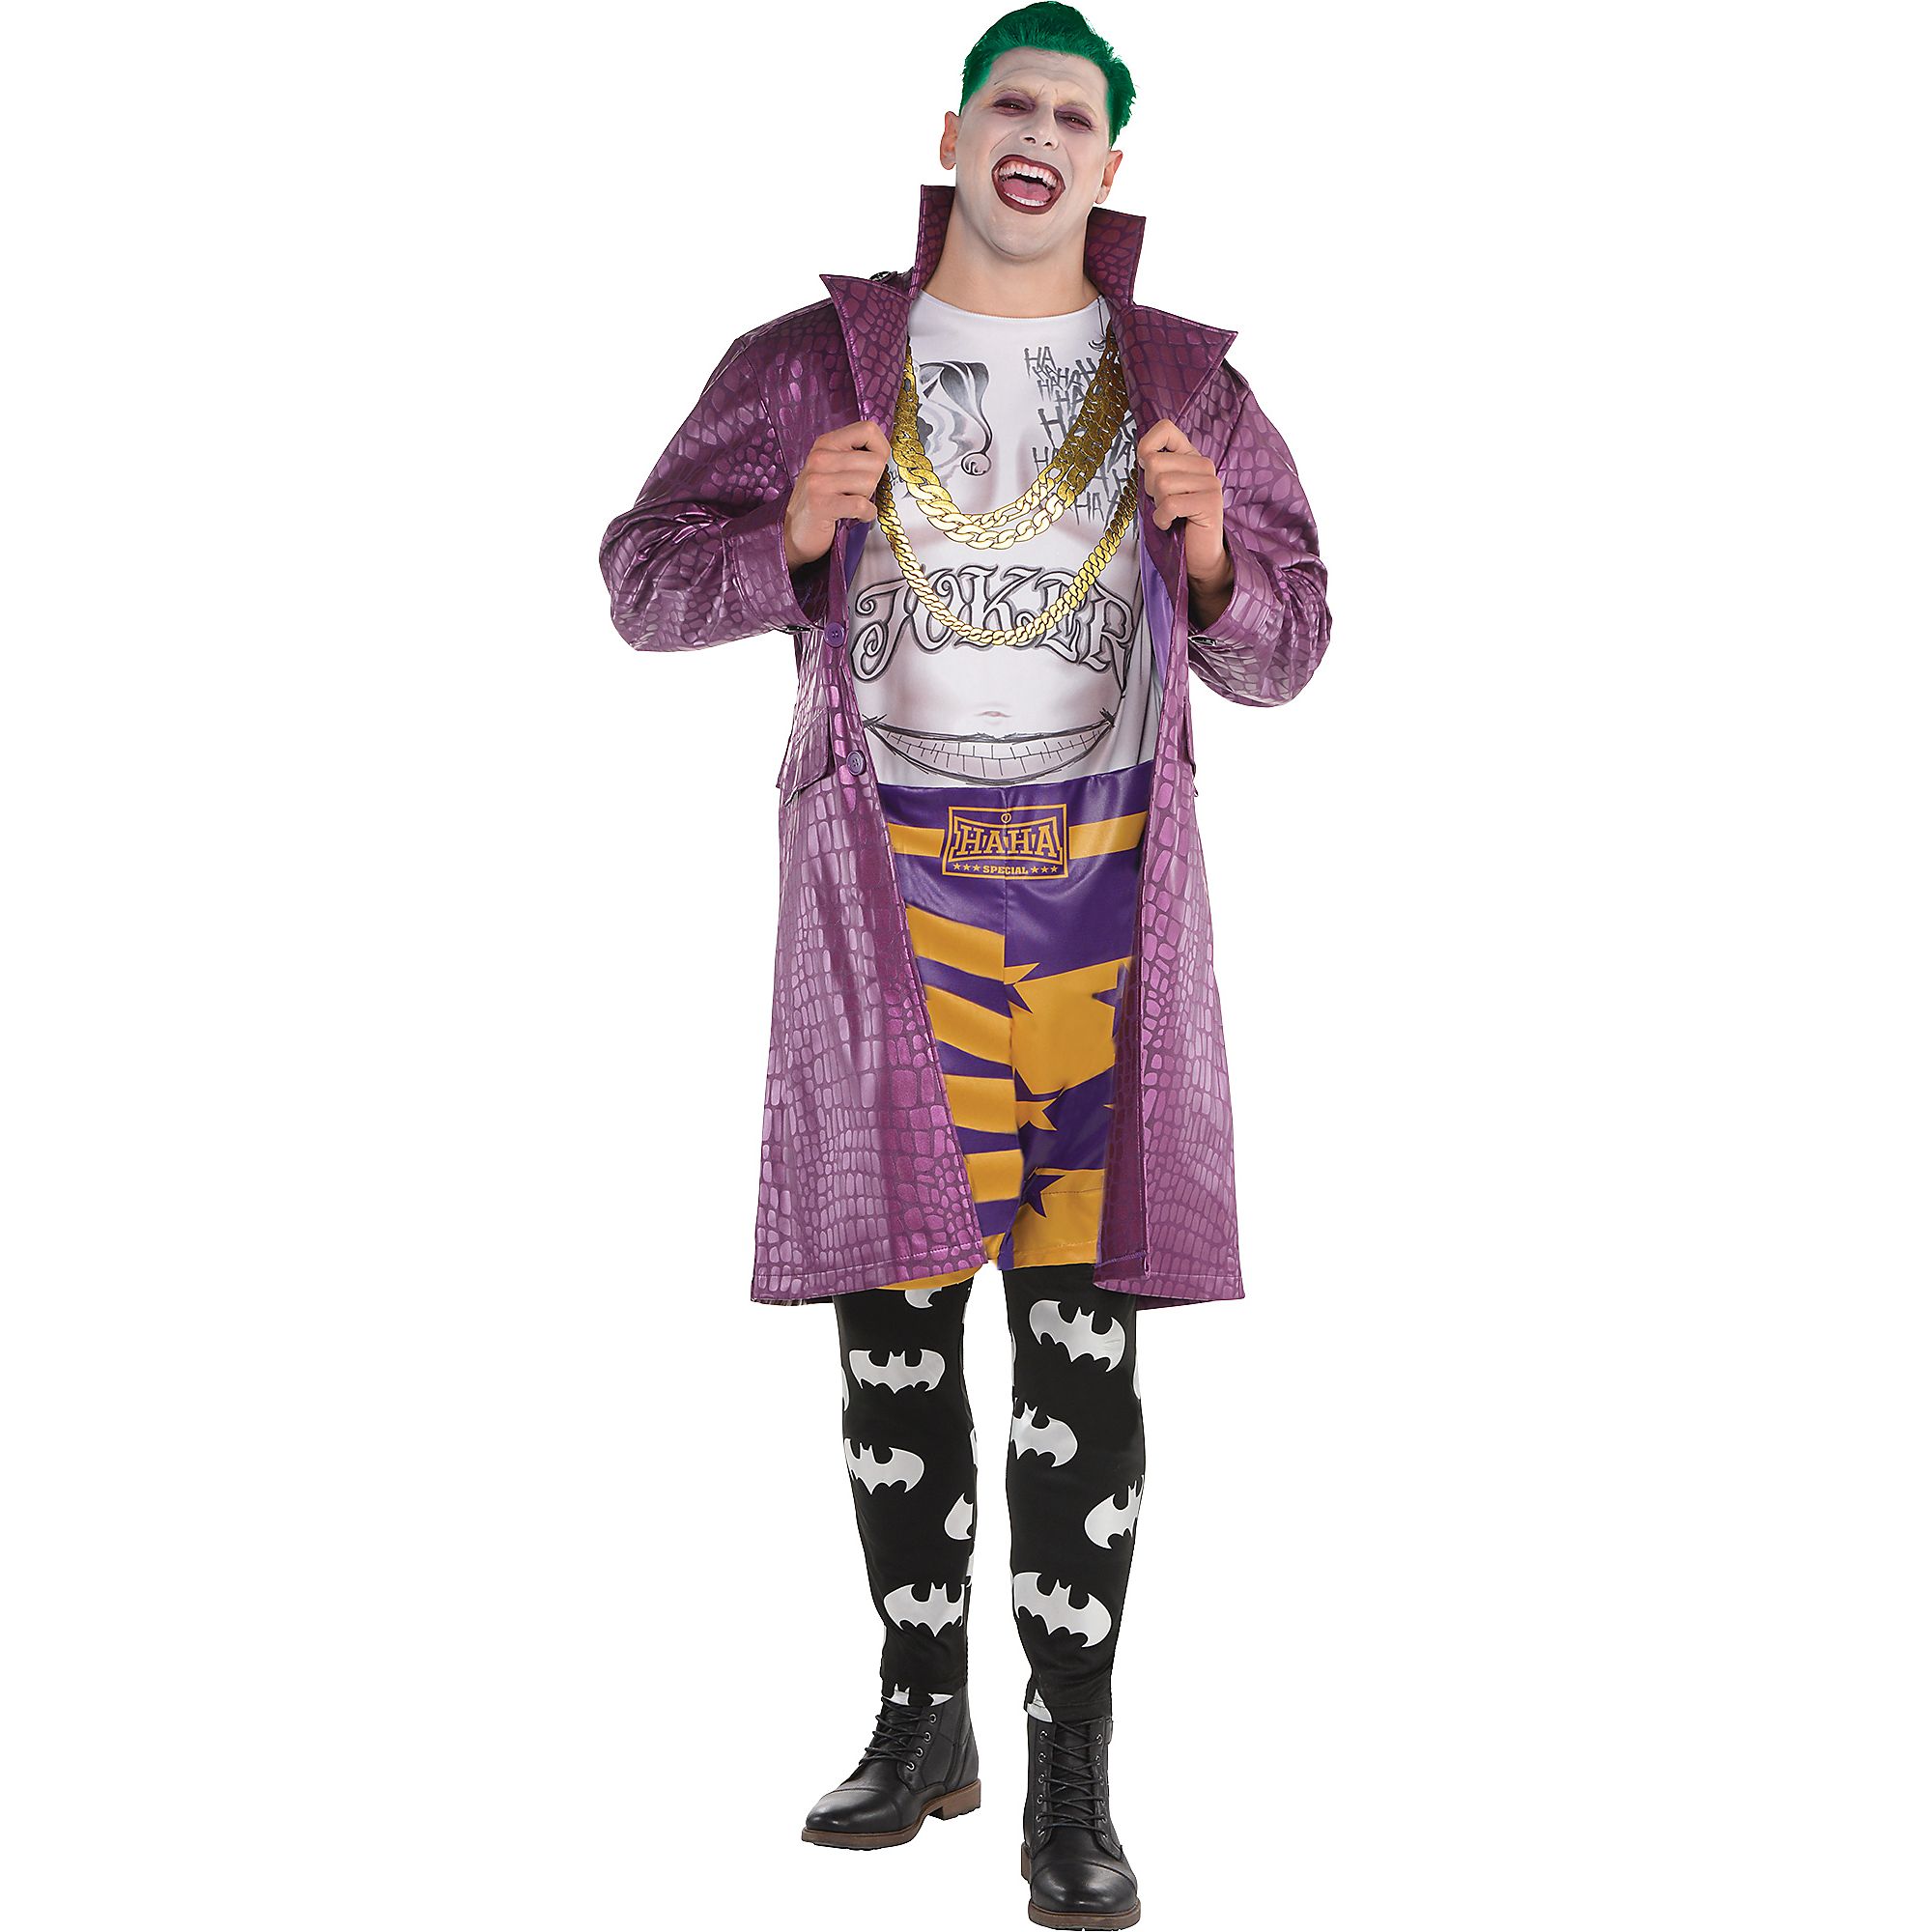 Psycho Joker Halloween Costume For Adults Suicide Squad Plus Size Ebay